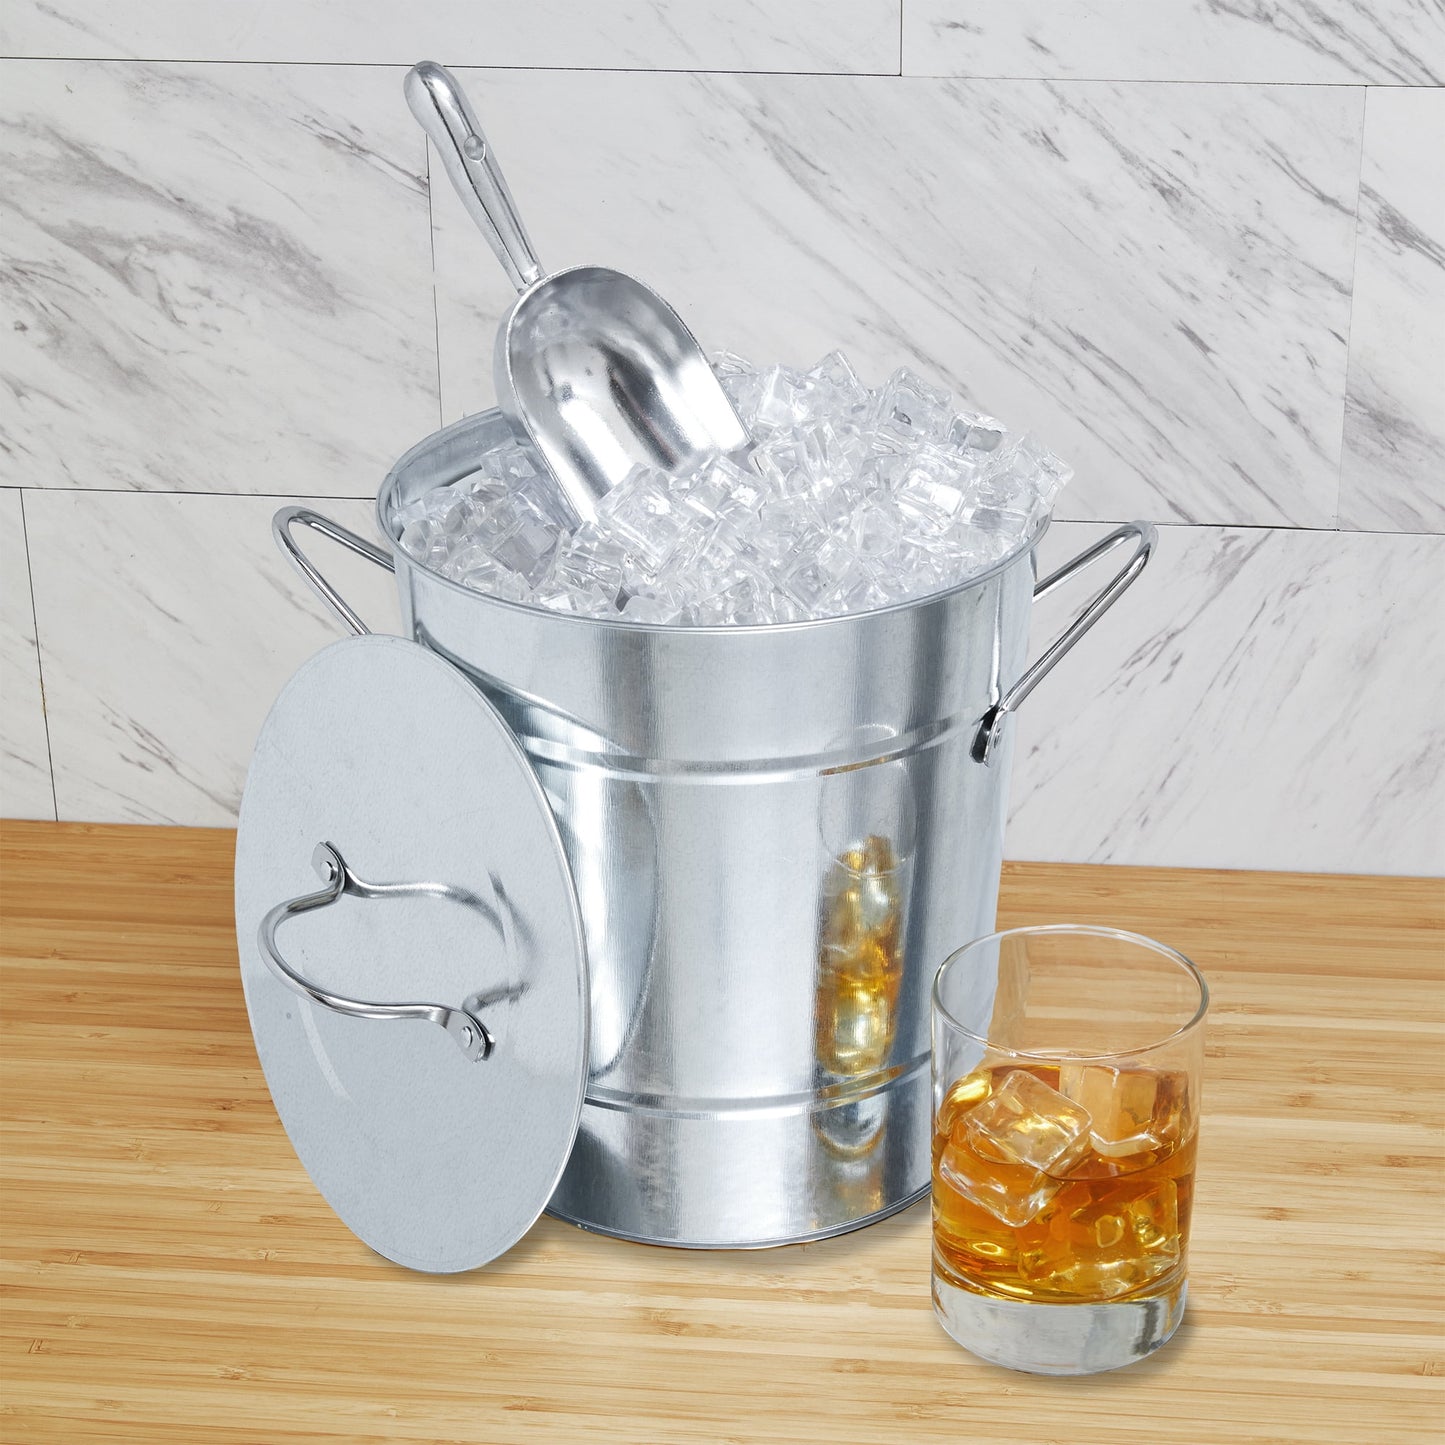 Twine Insulated Ice Bucket With Lid and Scooper - Galvanized Metal Bucket